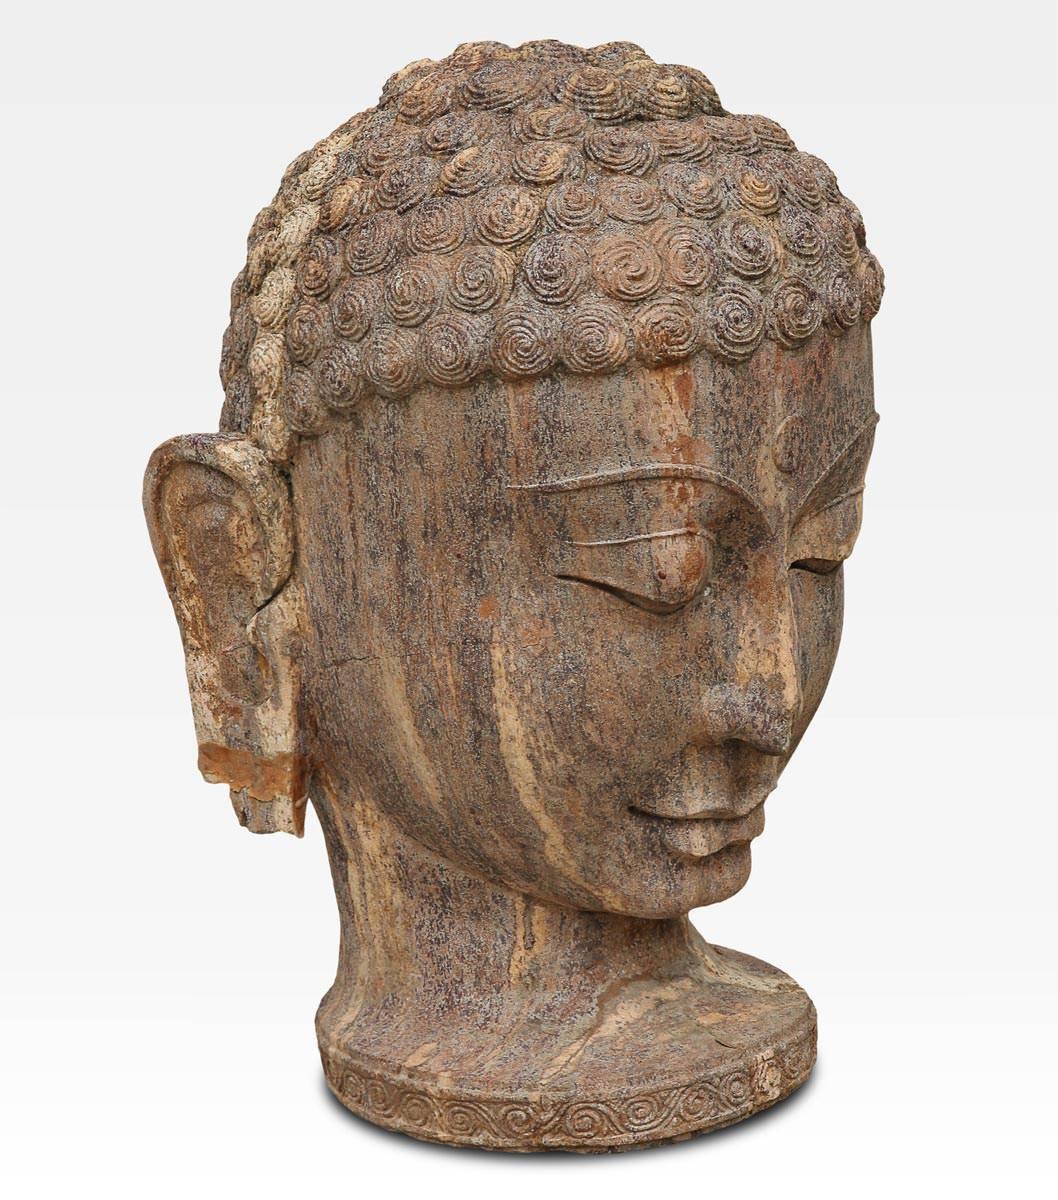 This sculpture of the Buddha follows the traditional Buddhist iconography: The long ears are symbol of knowledge, the third eye, carving in the middle of forehead, is symbol of the inner life. The strong effect of the expression conveys peace and